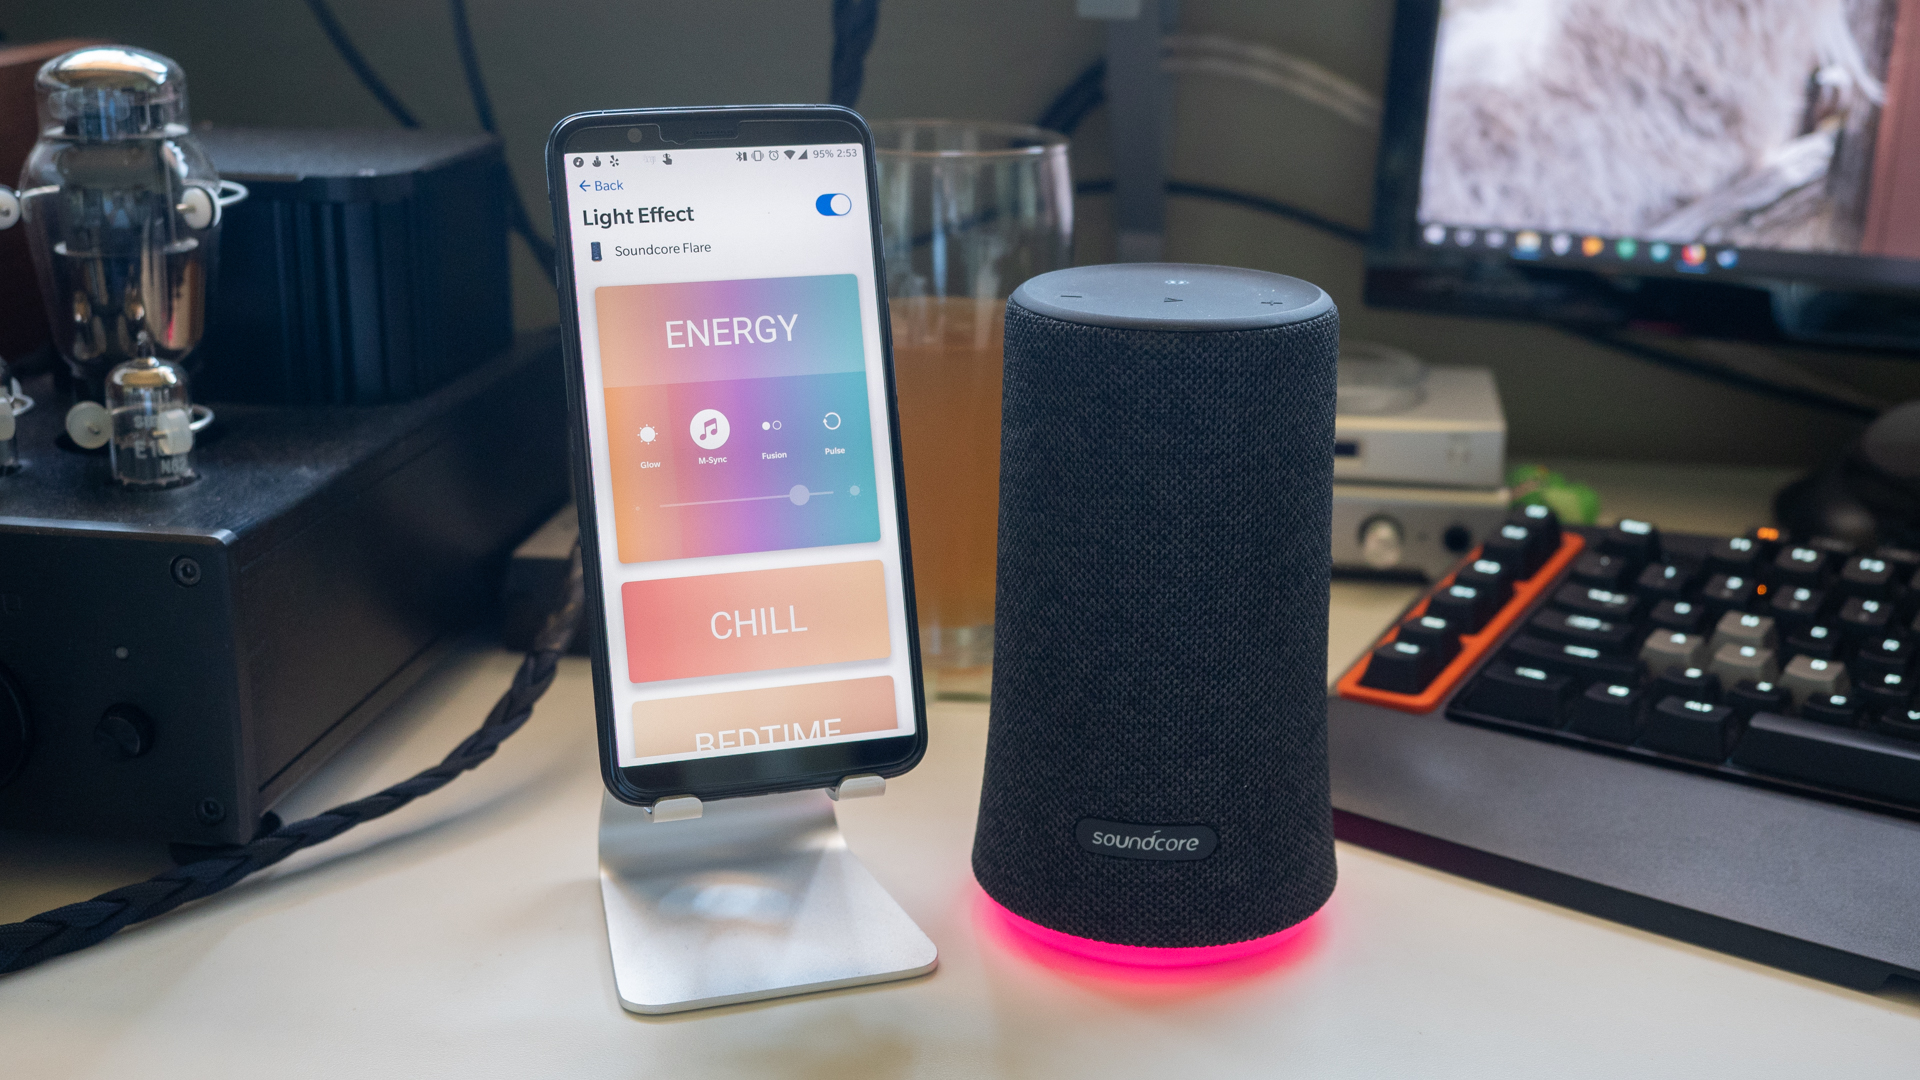 review anker soundcore 2